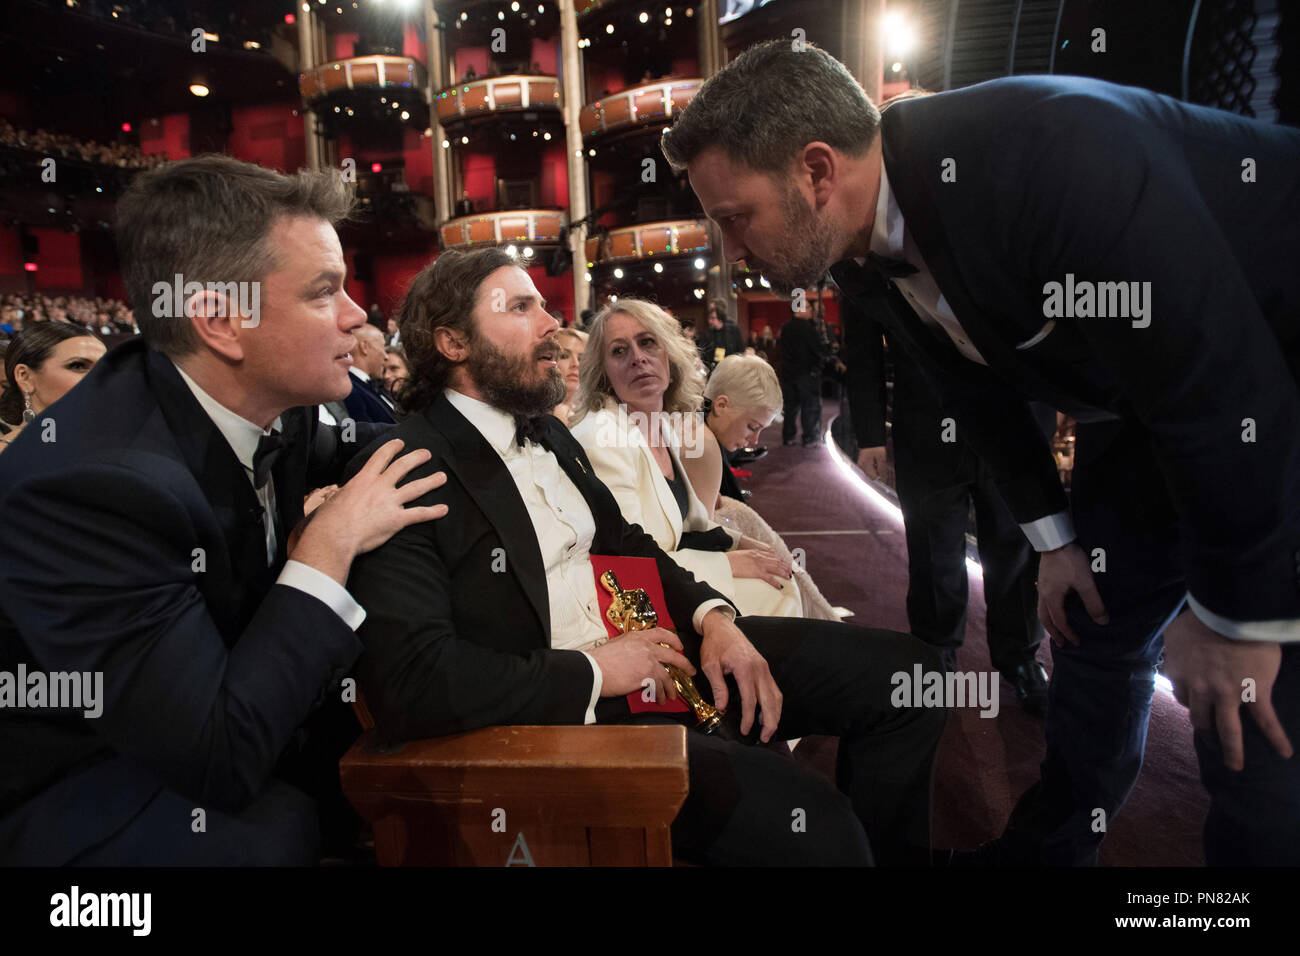 Matt Damon and Ben Affleck congratulate Casey Affleck after winning the Oscar® for Performance by an actor in a Leading role, for work on “Manchester by the Sea” during the live ABC Telecast of The 89th Oscars® at the Dolby® Theatre in Hollywood, CA on Sunday, February 26, 2017.   File Reference # 33242 654THA  For Editorial Use Only -  All Rights Reserved Stock Photo